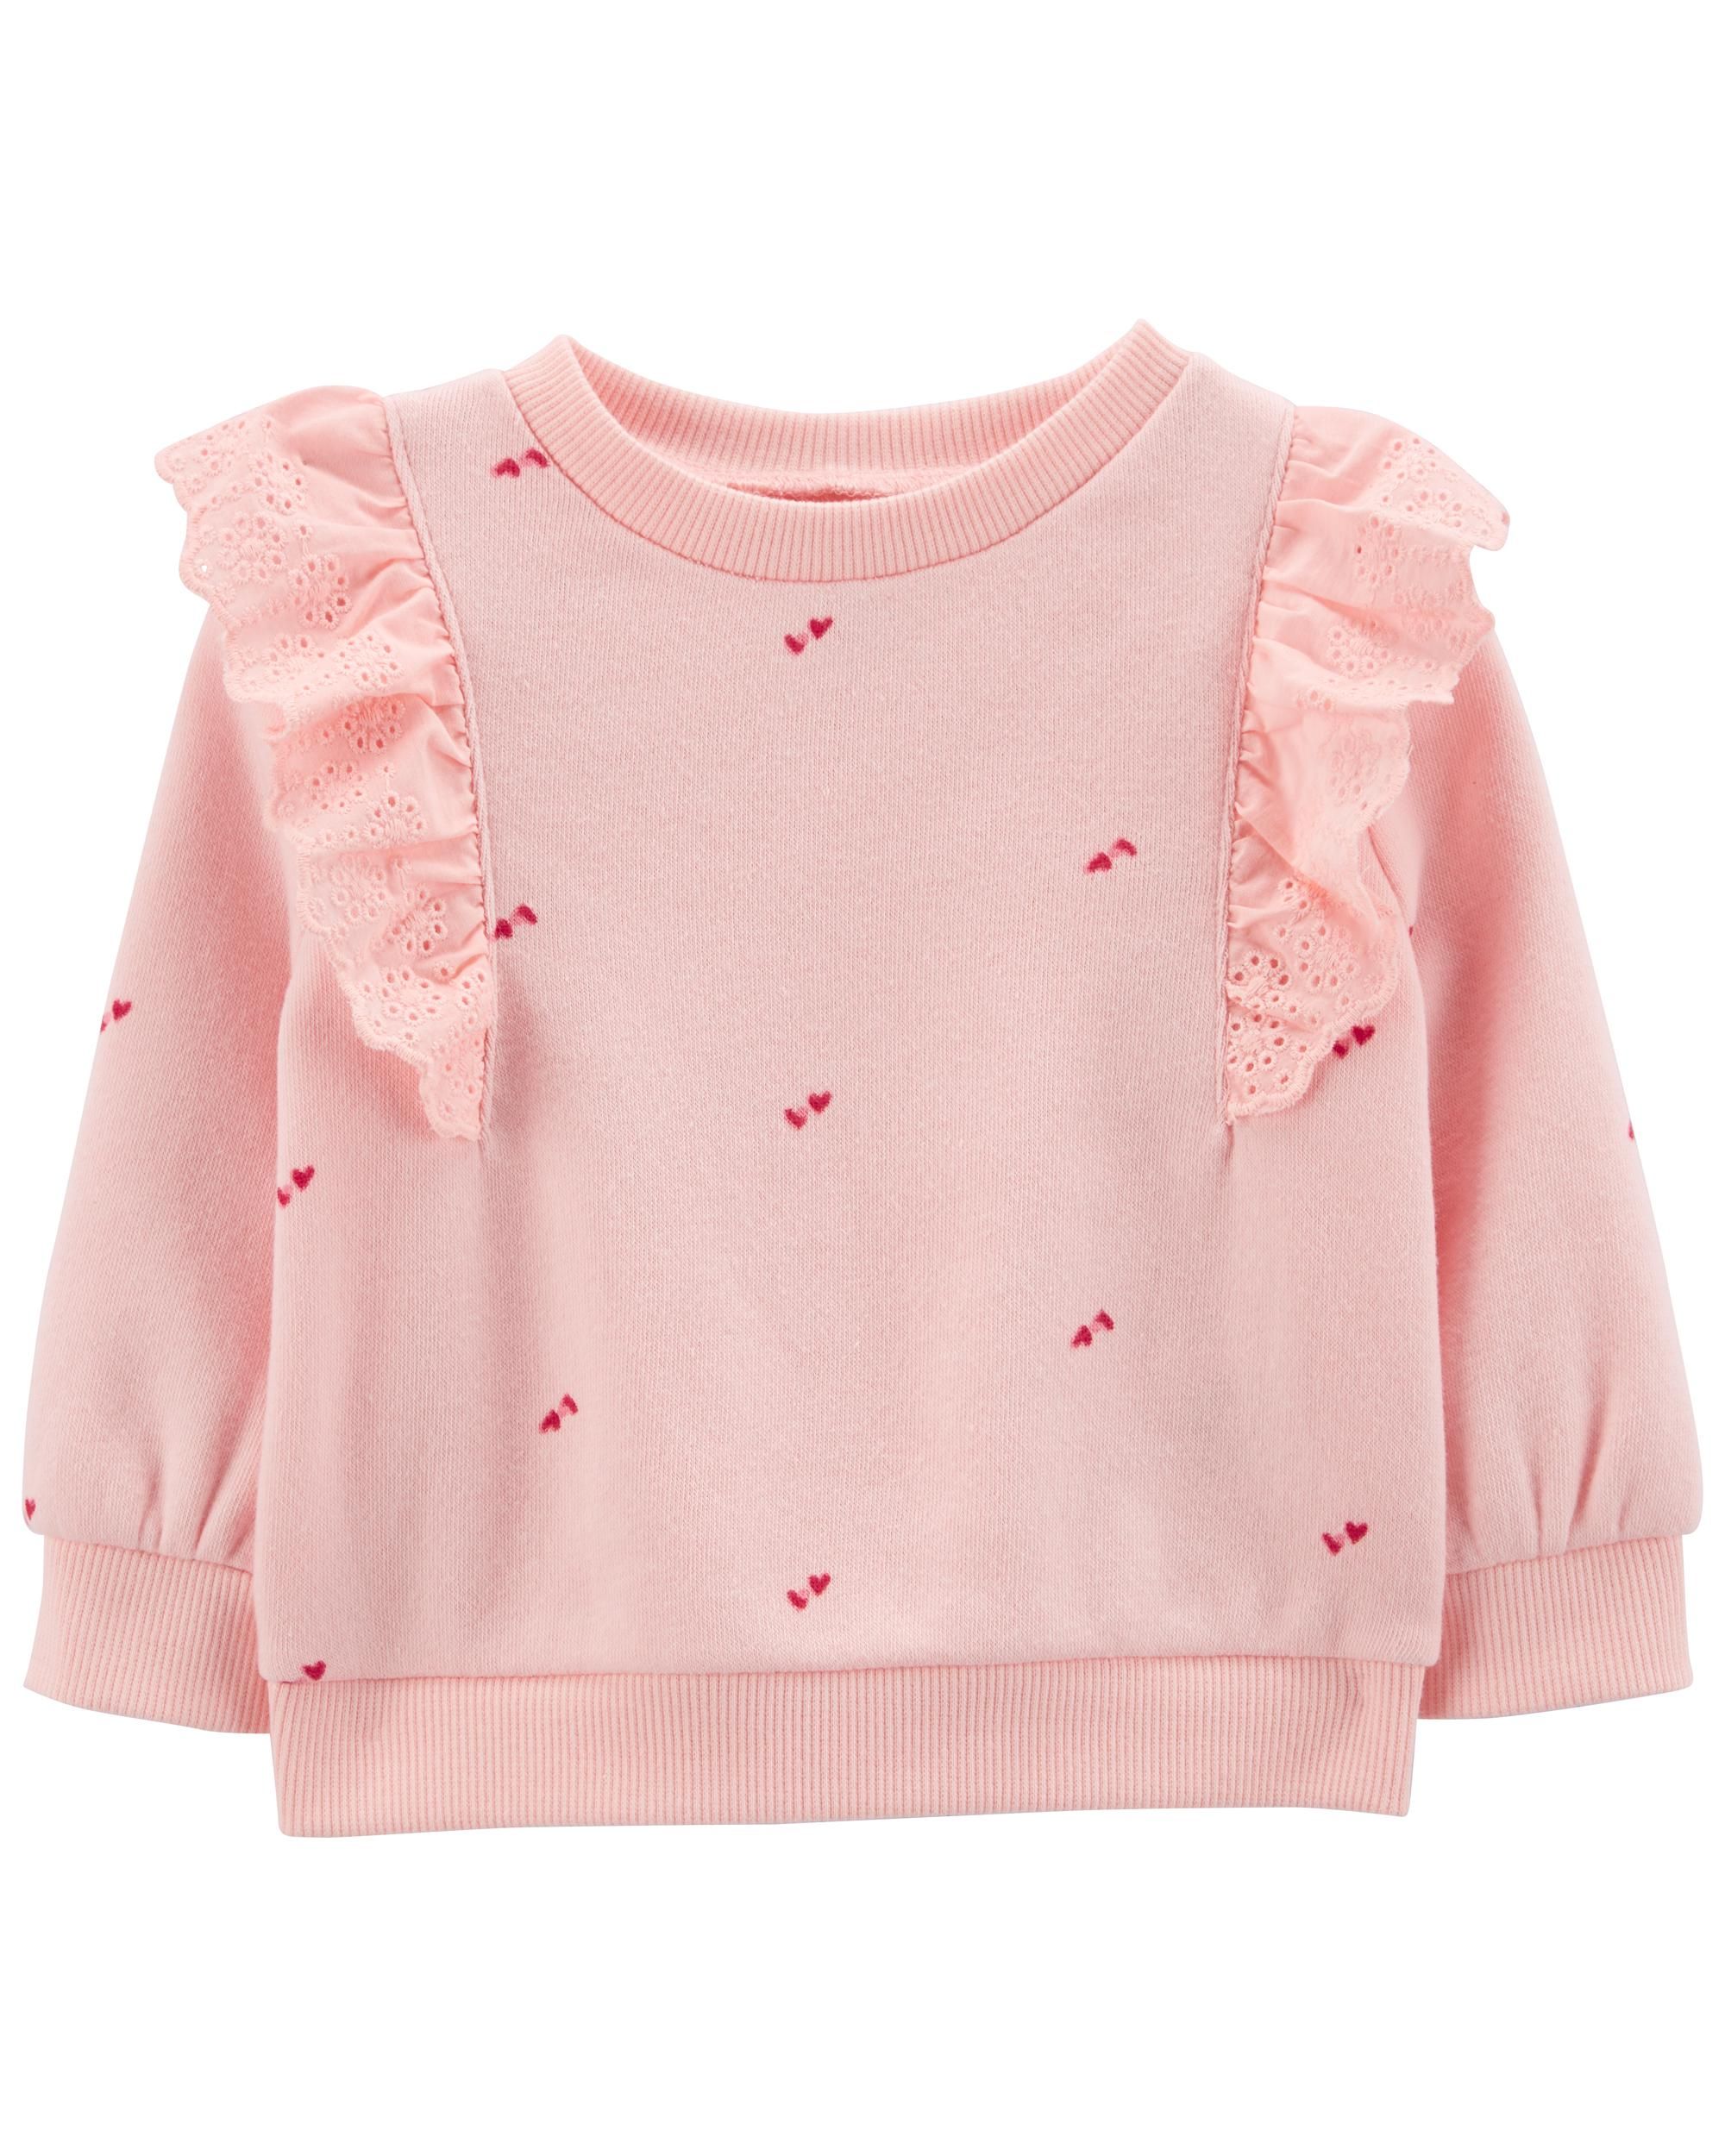 Heart Printed Pullover Sweater | Carter's